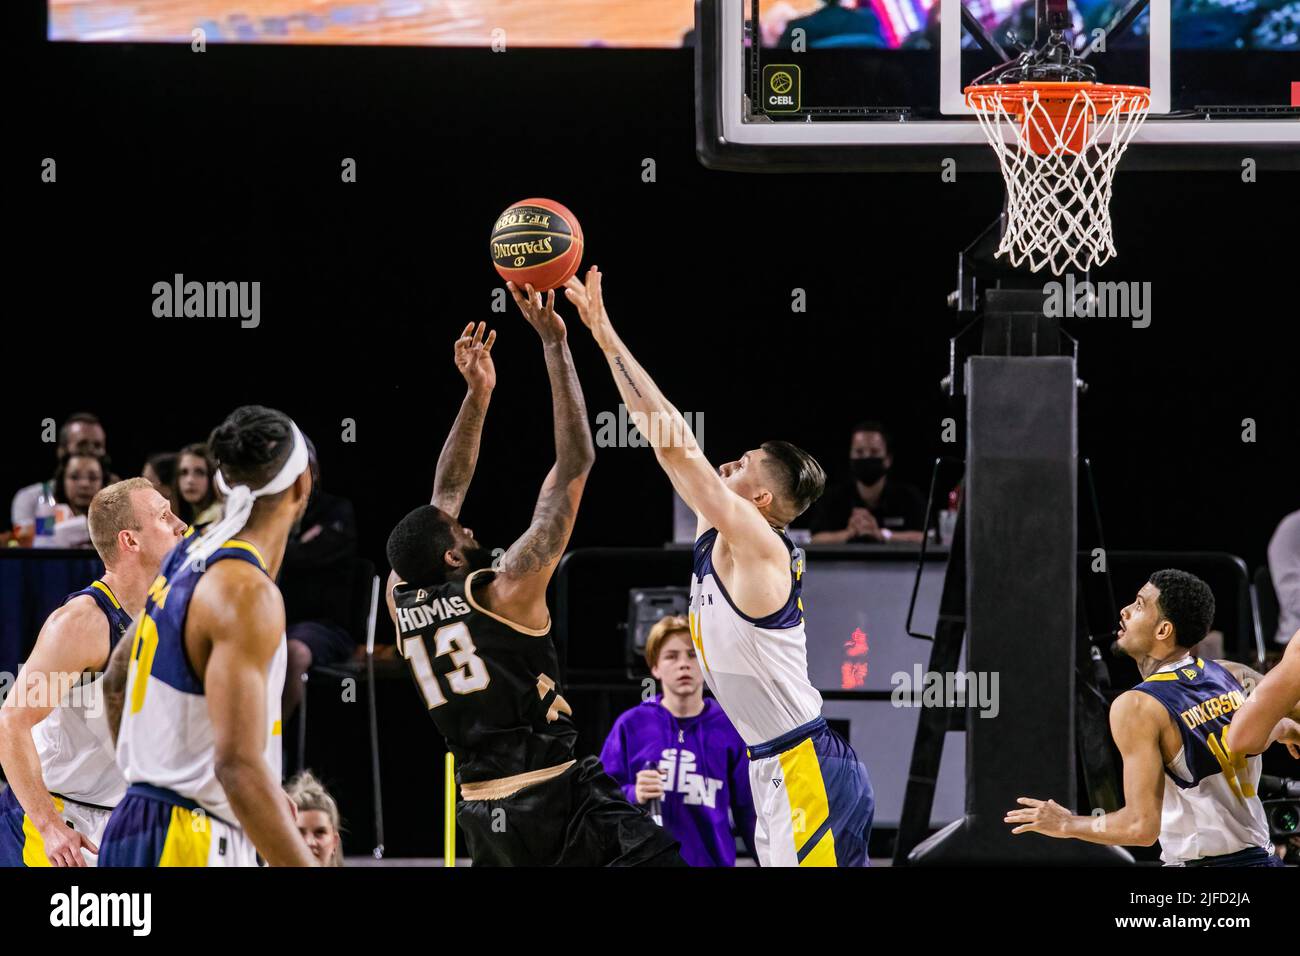 Edmonton's #14 Brody Clarke (forward) gets up over Newfoundland's #13 Terry Thomas (Guard) during the Edmonton Stingers rout of the Newfoundland Growlers in Canadian Elite Basketball Action with a historic victory. Edmonton Stingers 120-69  Fraser Valley Bandits. Stock Photo